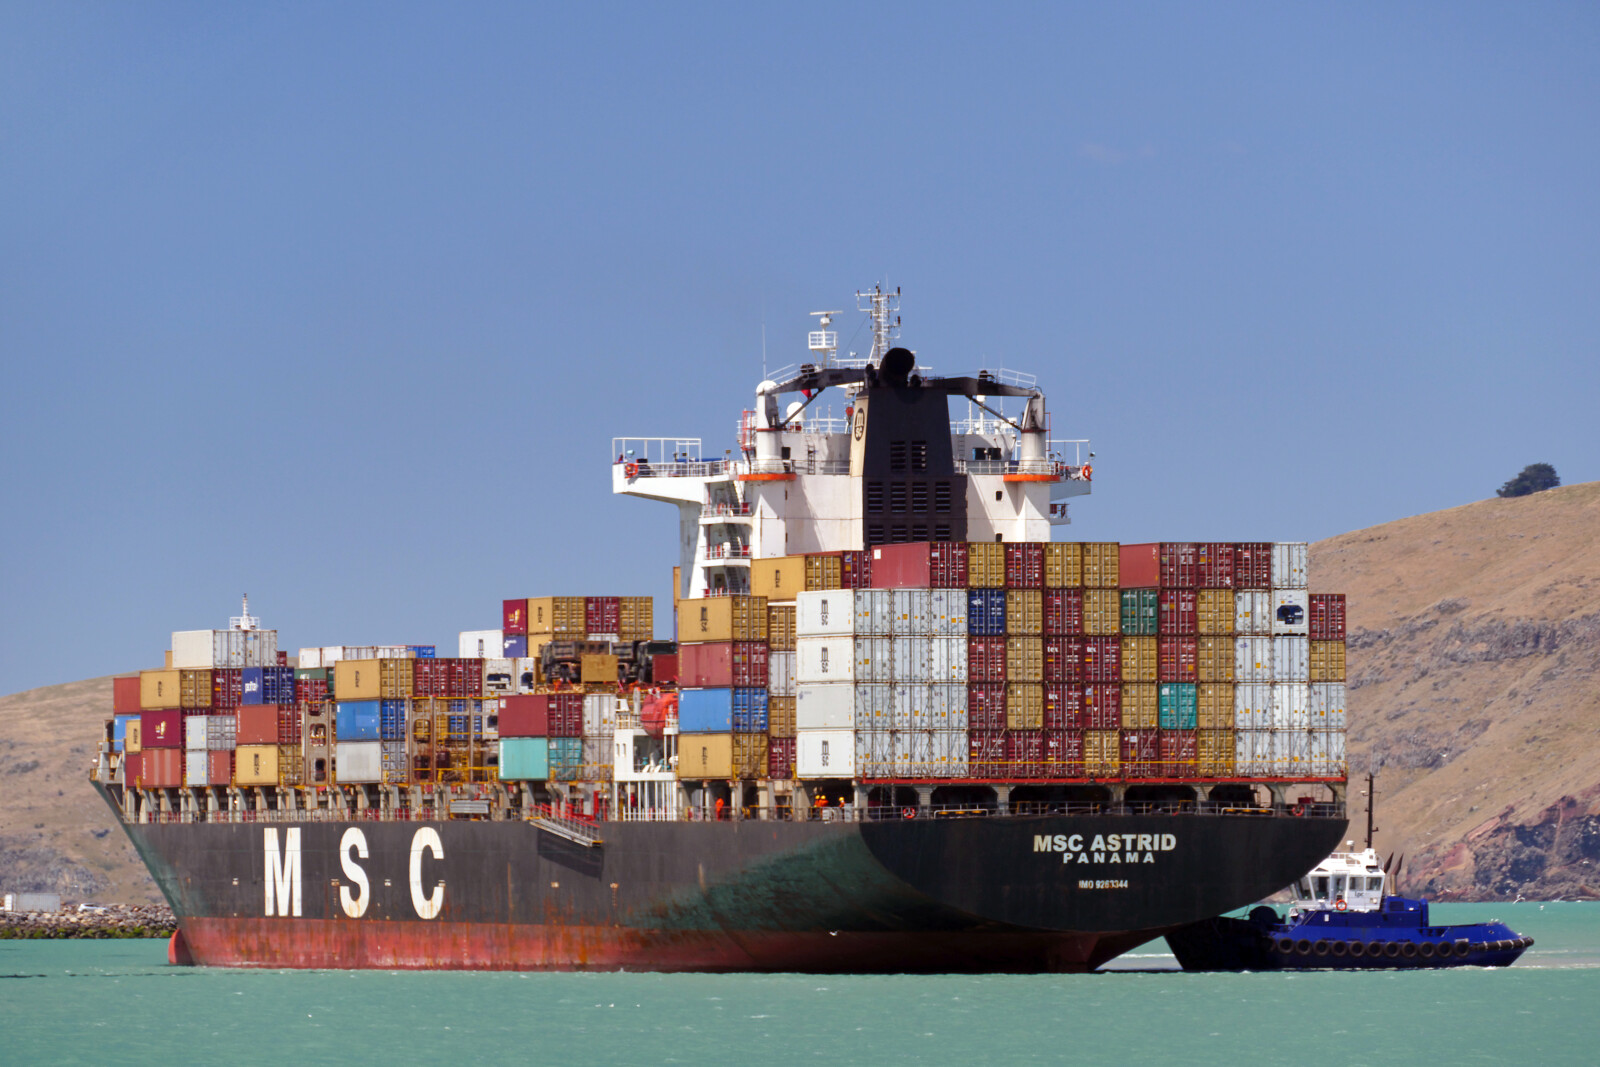 How is the Coronavirus (COVID-19) affecting the container shipping industry?